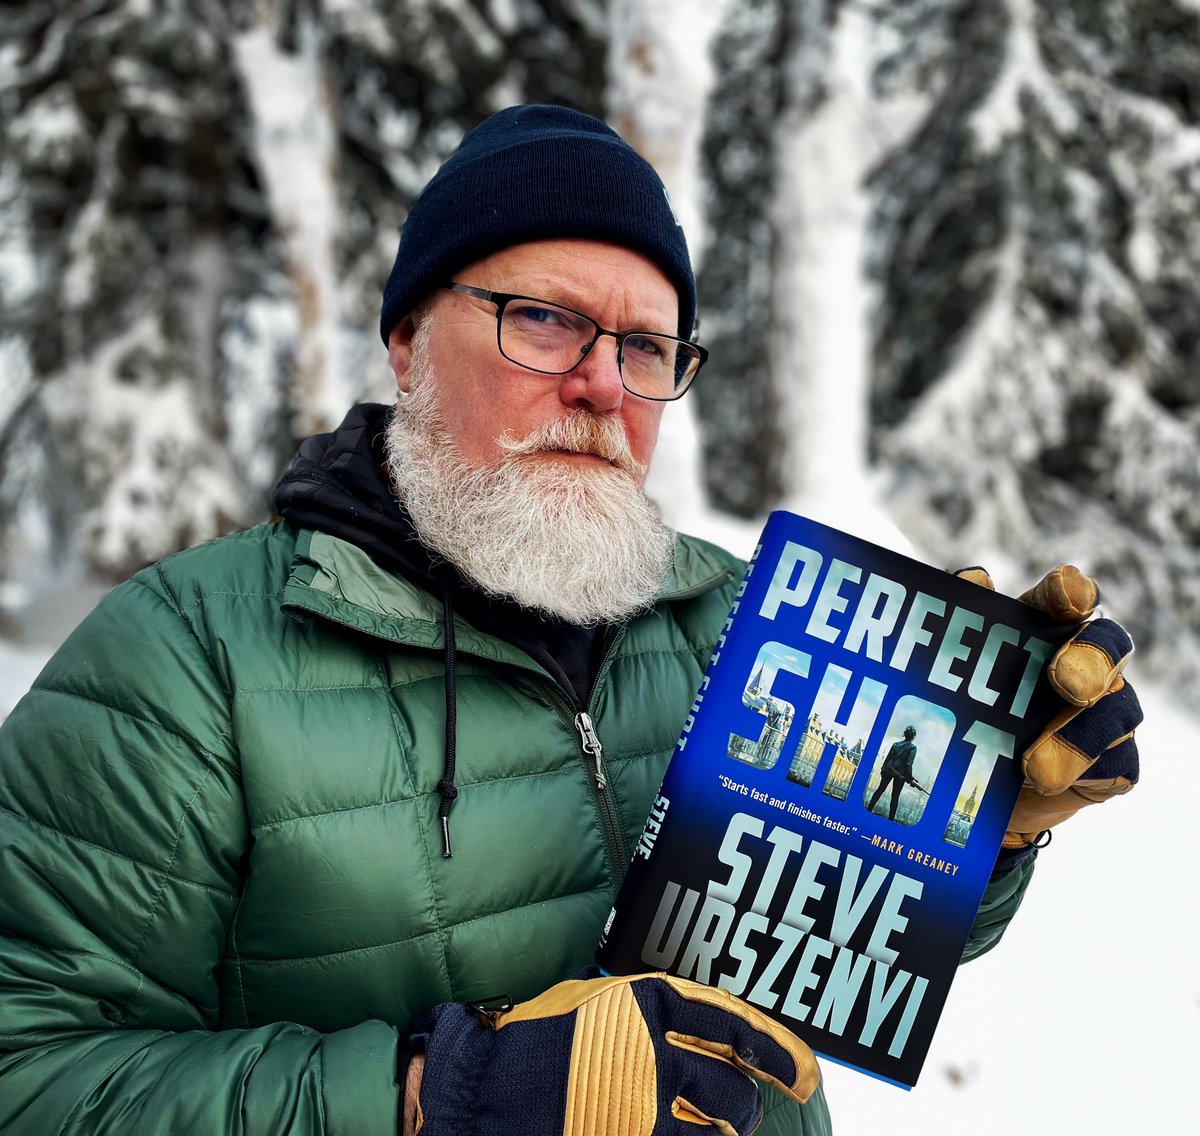 Happy Publication Day from Alaska to Steve Urszenyi! PERFECT SHOT is the perfect debut. We’ll done, my friend.